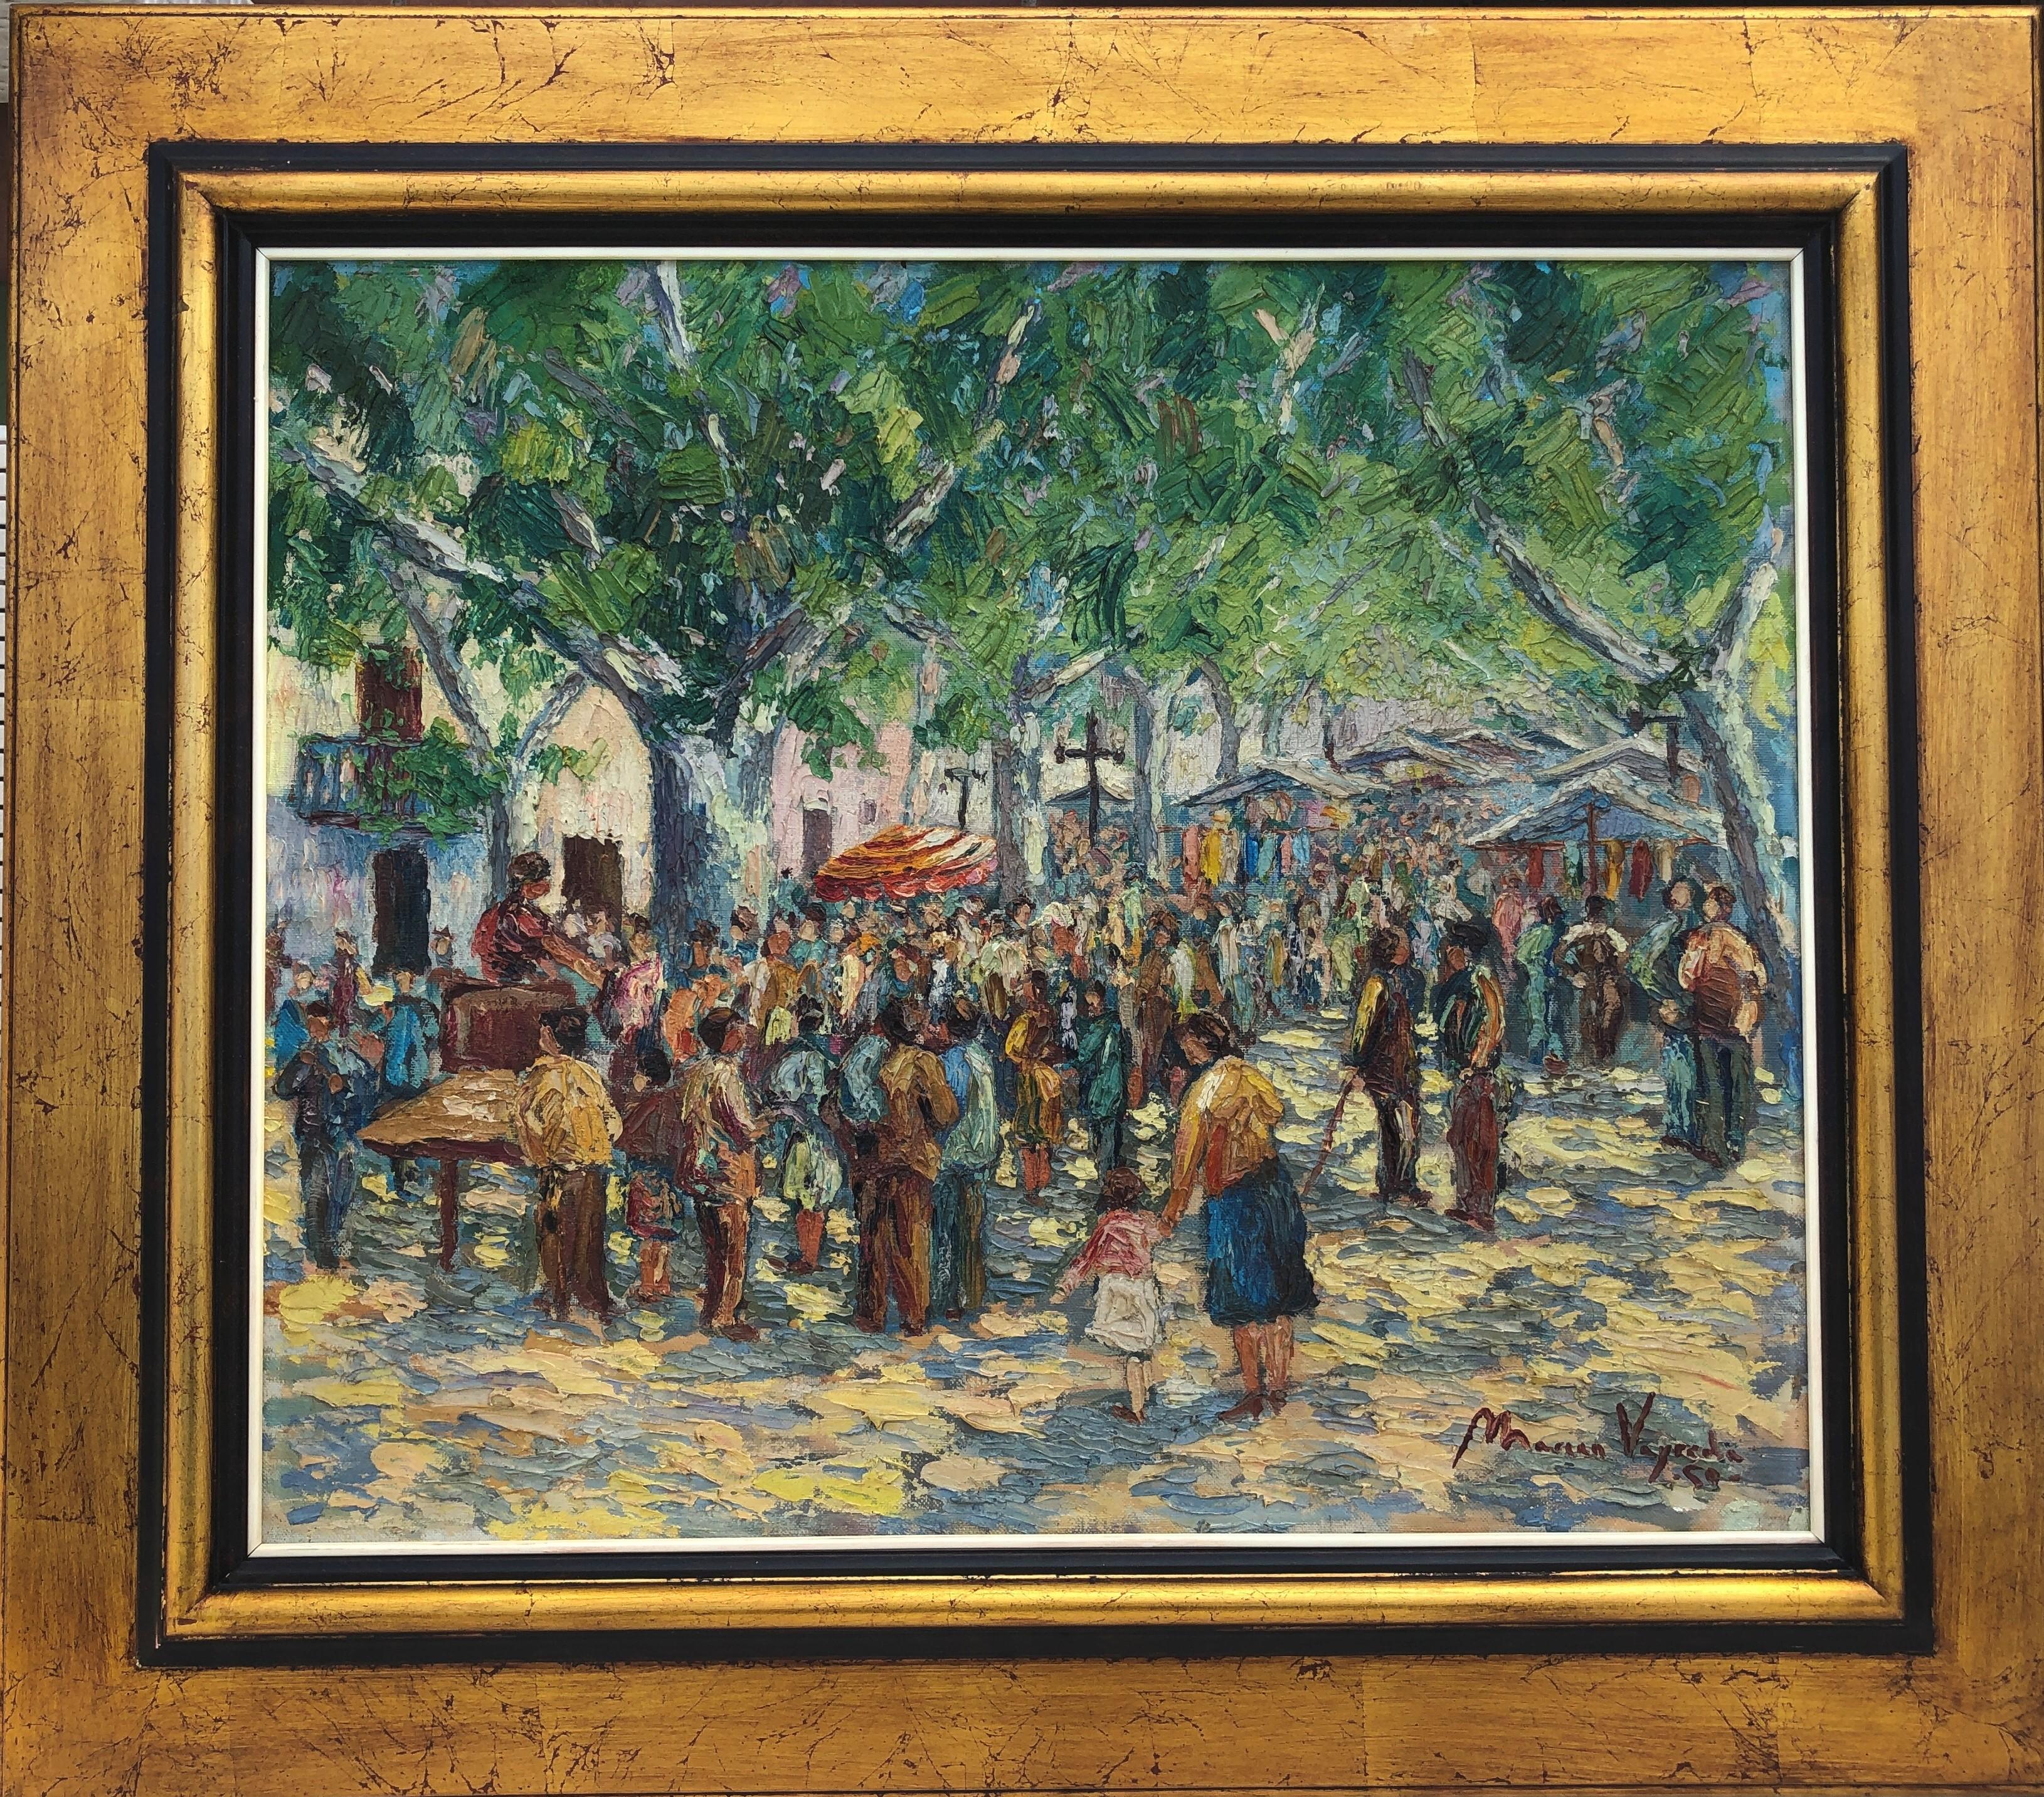 market day in spain oil on canvas painting - Painting by Mariano Vayreda Canadell